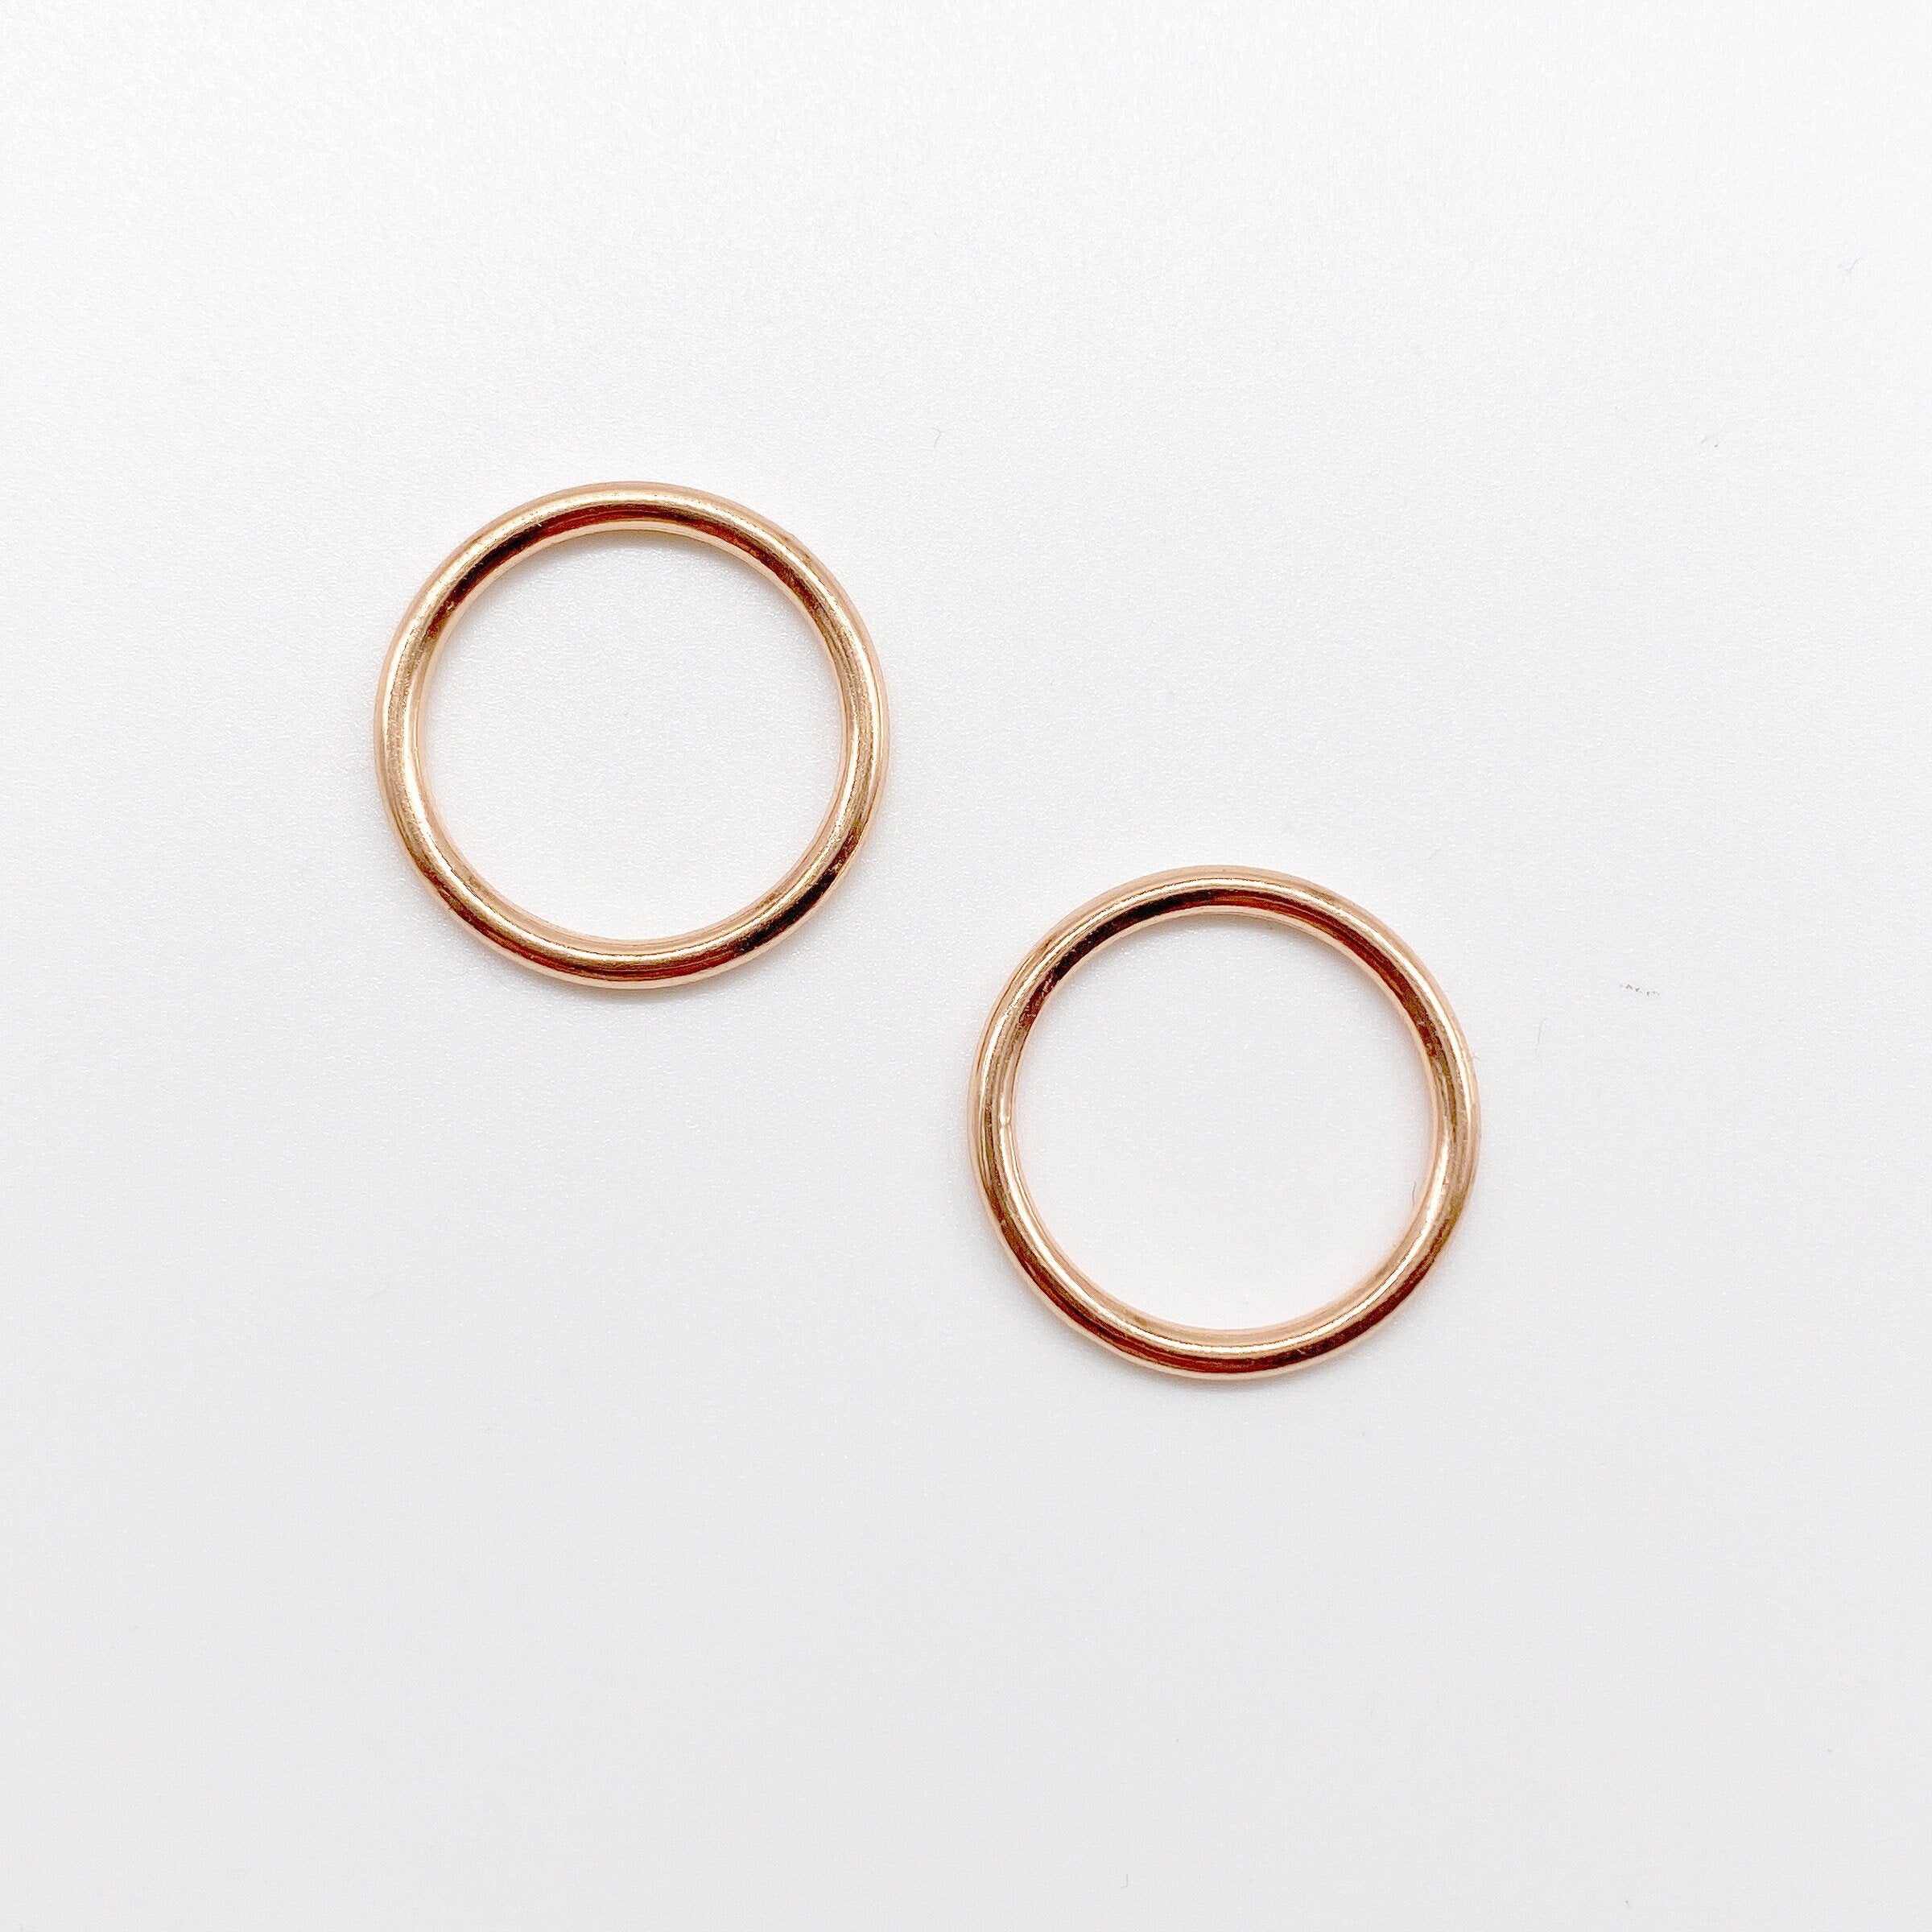 Set of 2 Thicker Rings OR 2 Tall Thick Sliders in Rose Gold for Swimwear or Bra making- 1/4"/6mm, 3/8"/10mm, 1/2"/12mm, 5/8"/15mm - Stitch Love Studio